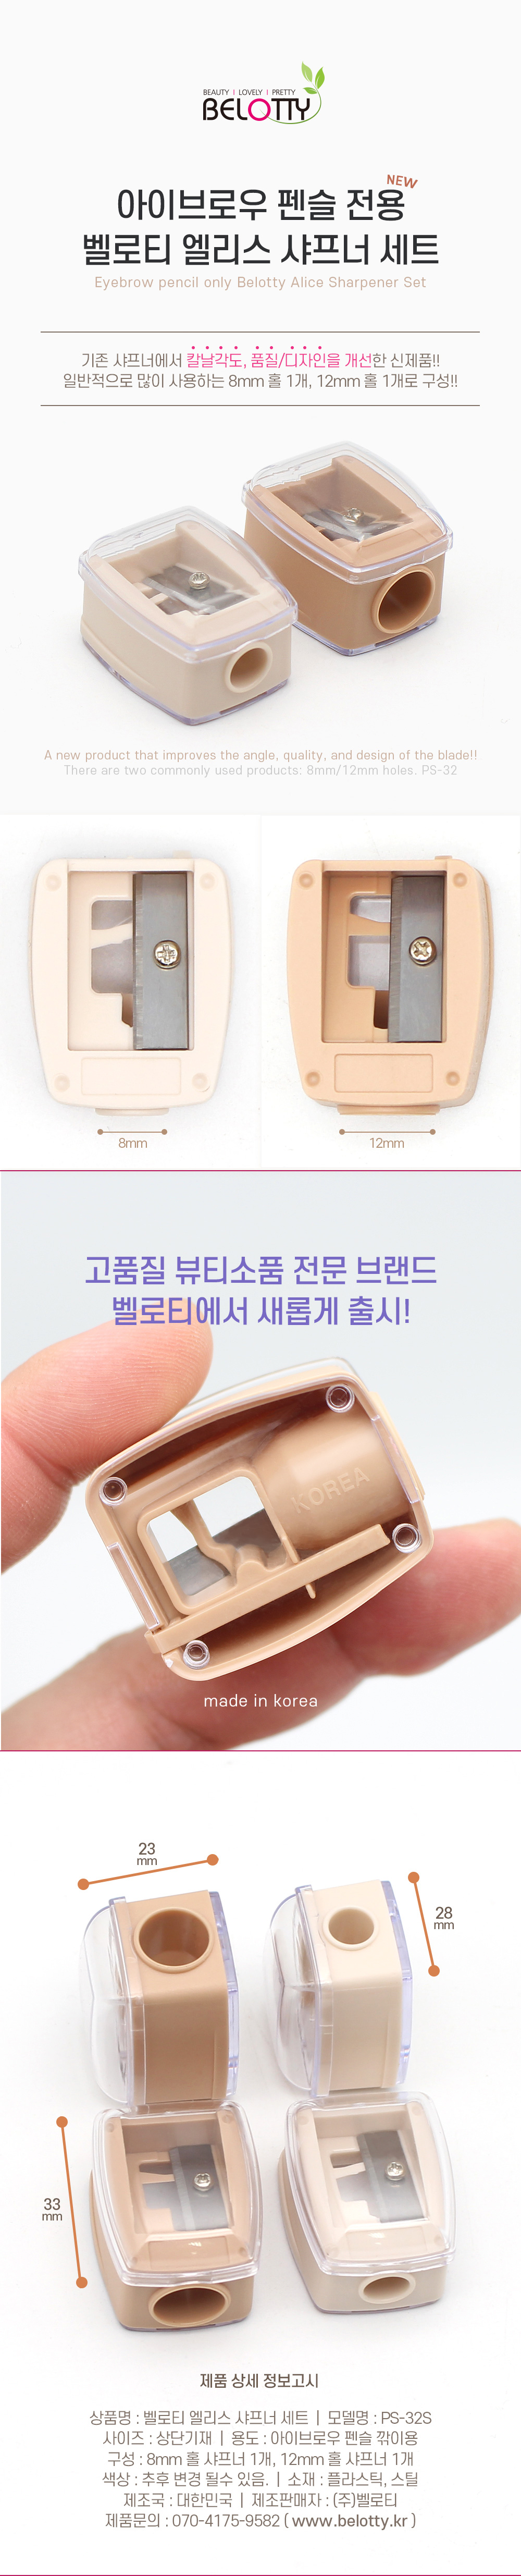 watch product image-S6L1